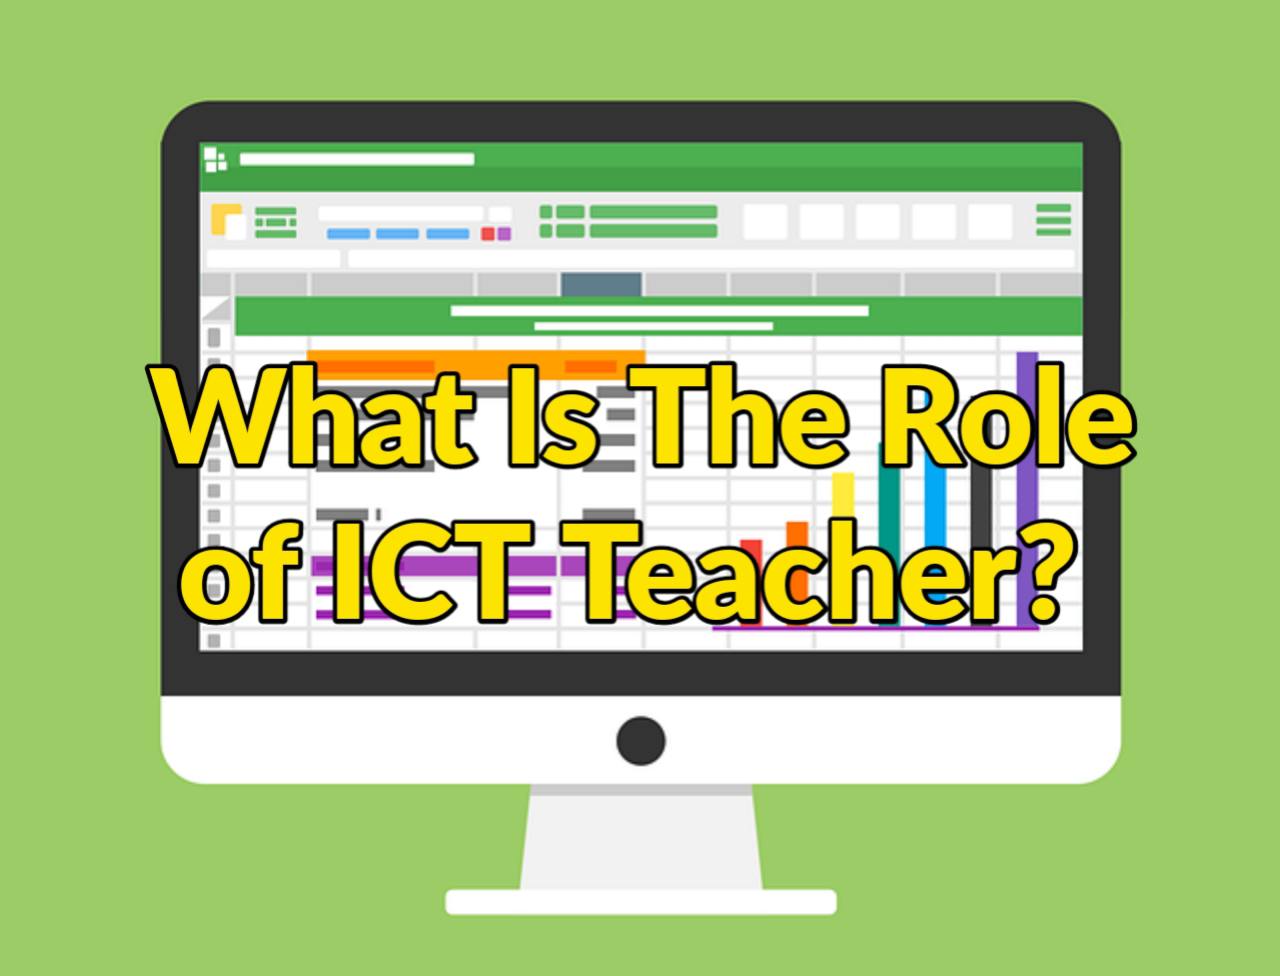 What is the role of ICT teacher